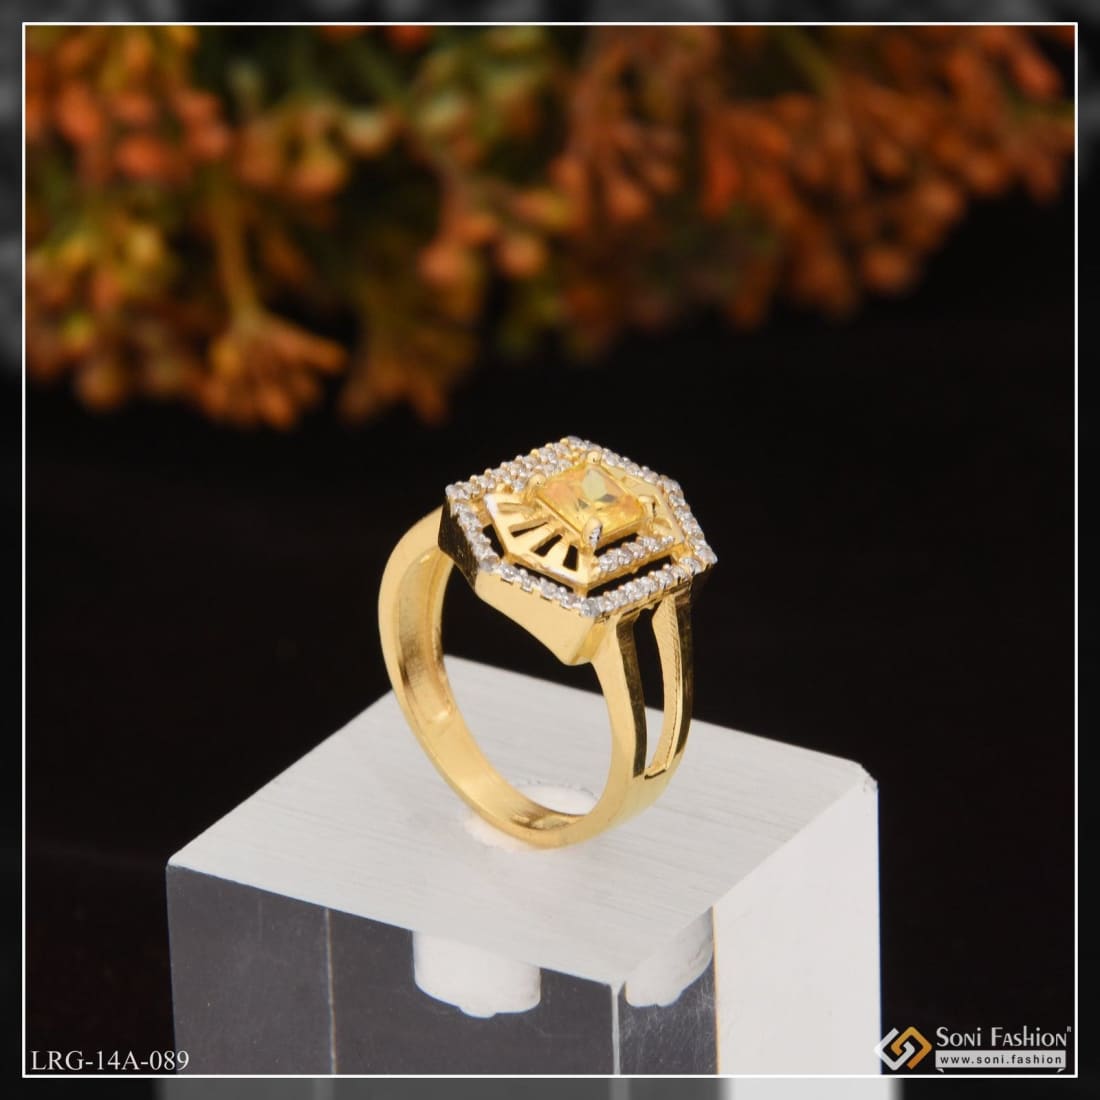 Gold design ring | 9 stunning gold ring designs for women | Times Now